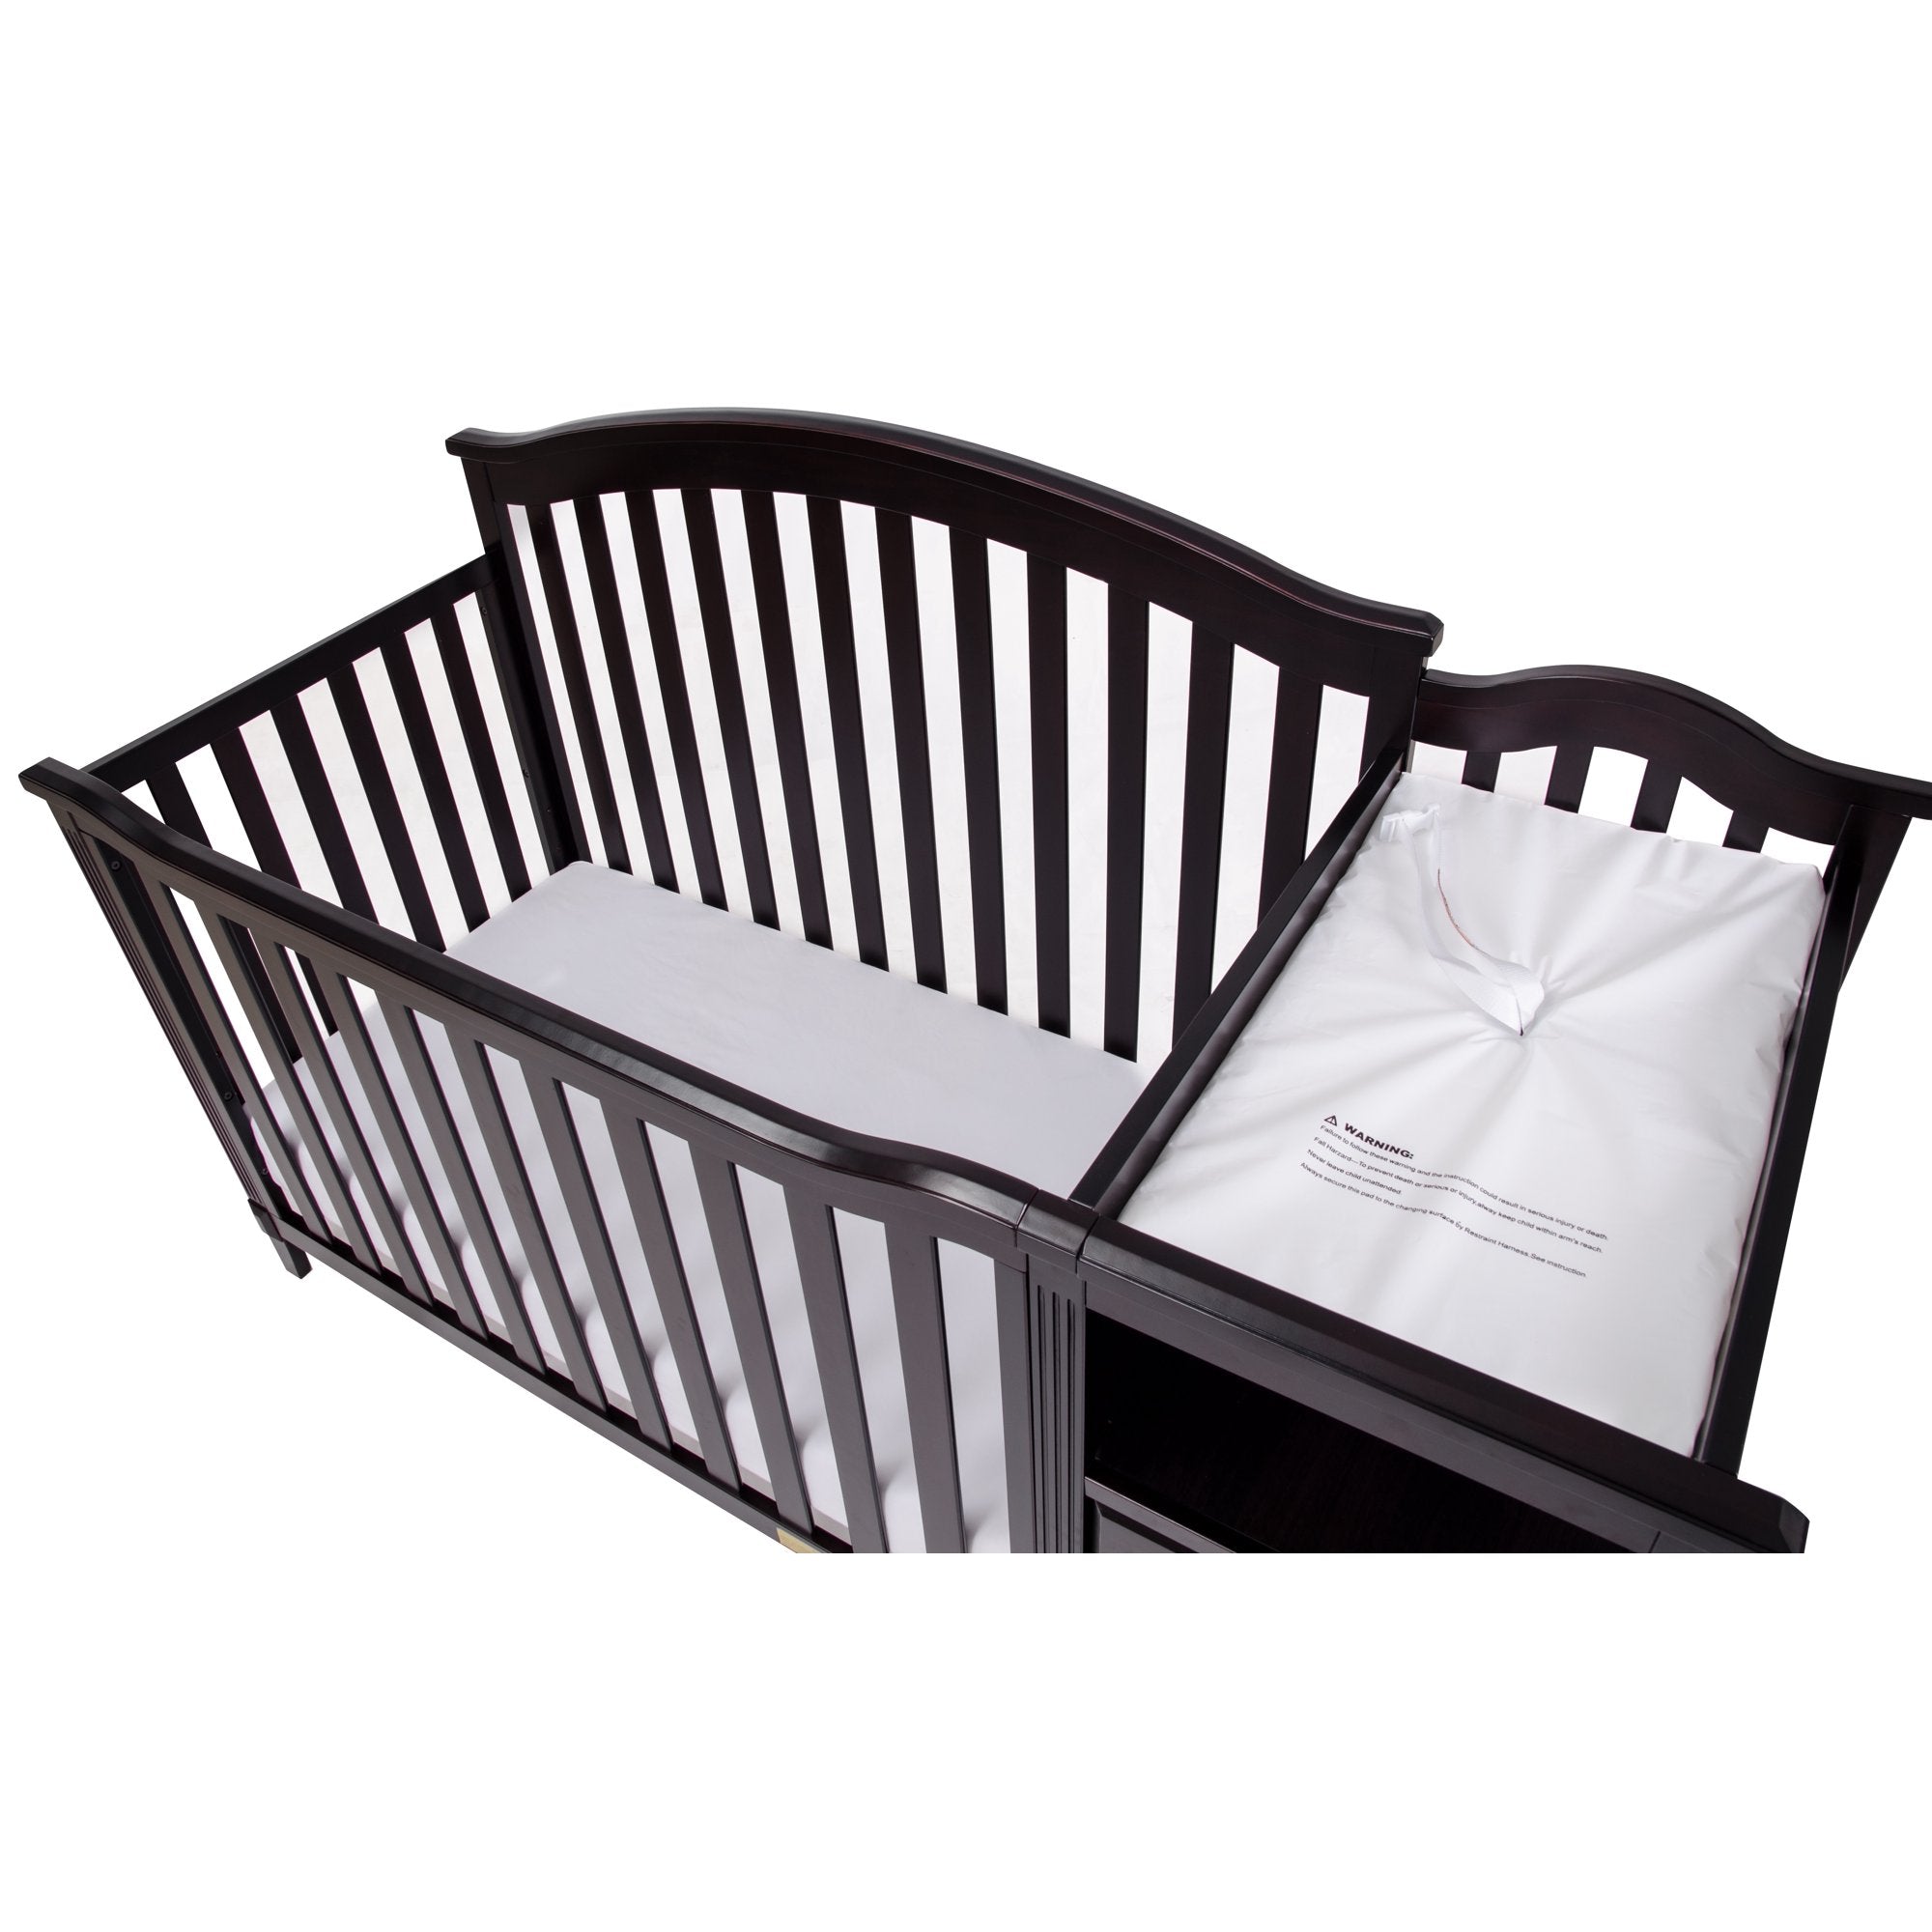 BABY WOODEN COT DLX WITH CHANGER TABLE - BC-1100-E